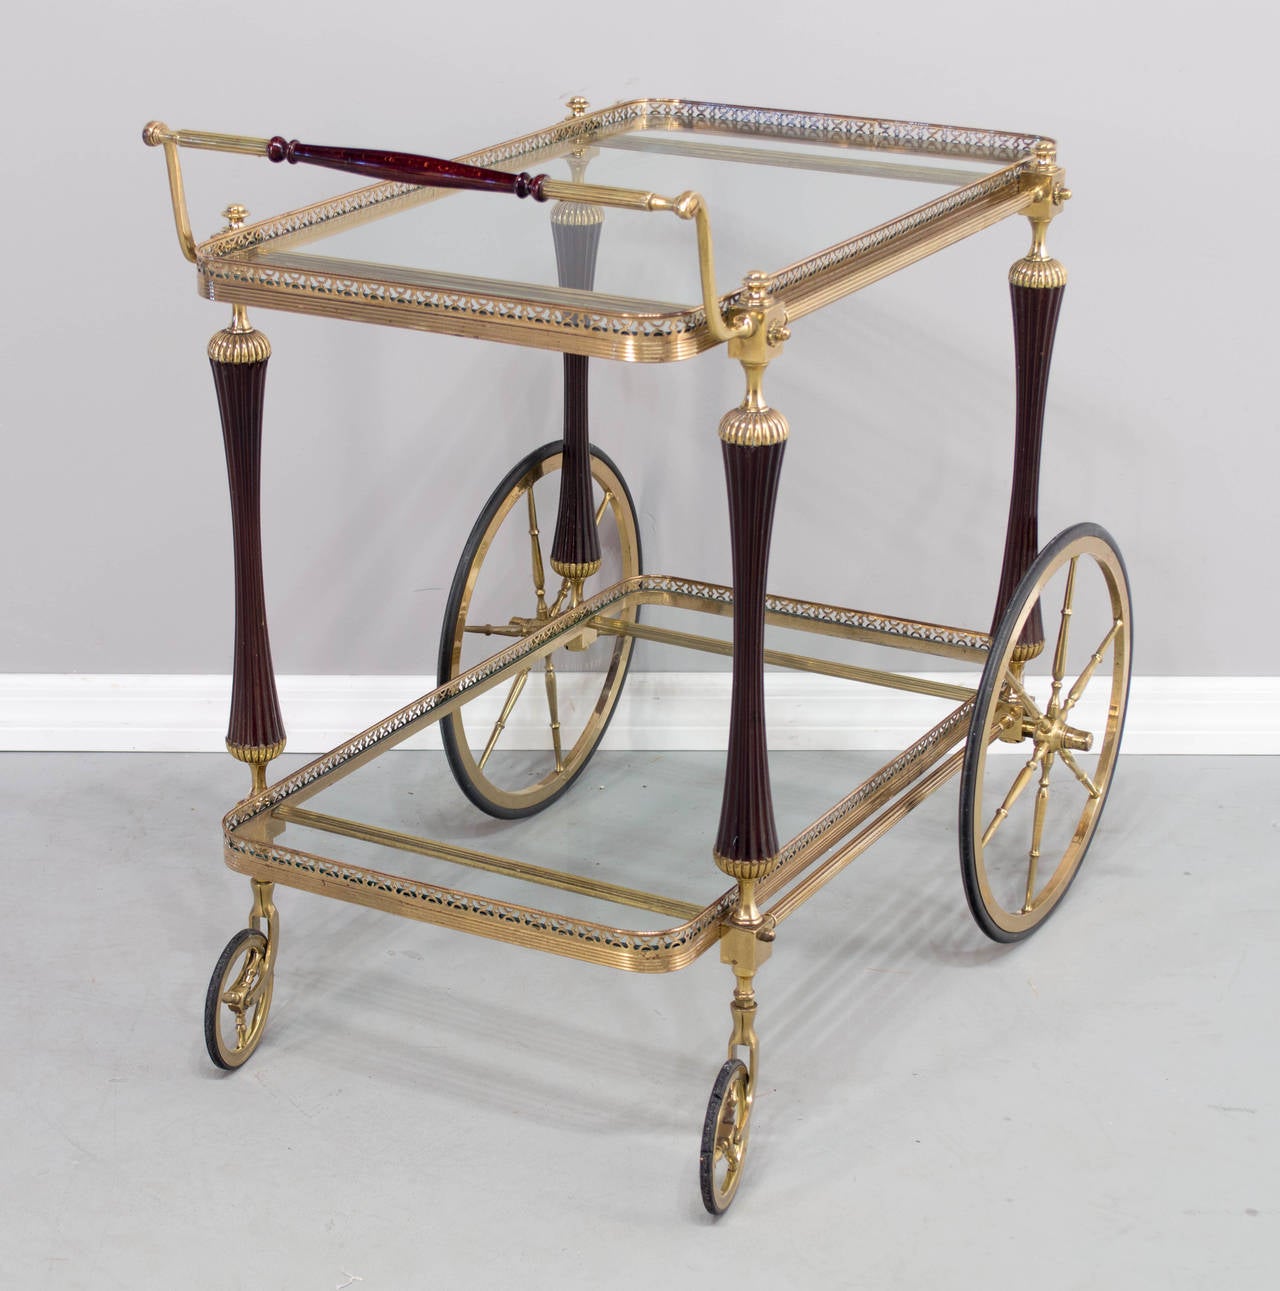 A French solid brass and mahogany bar cart. The brass is polished but not lacquered and the glass shelves are new. The rubber of the front right wheel is a little worn but the cart rolls well.
The glass shelves are 16.5